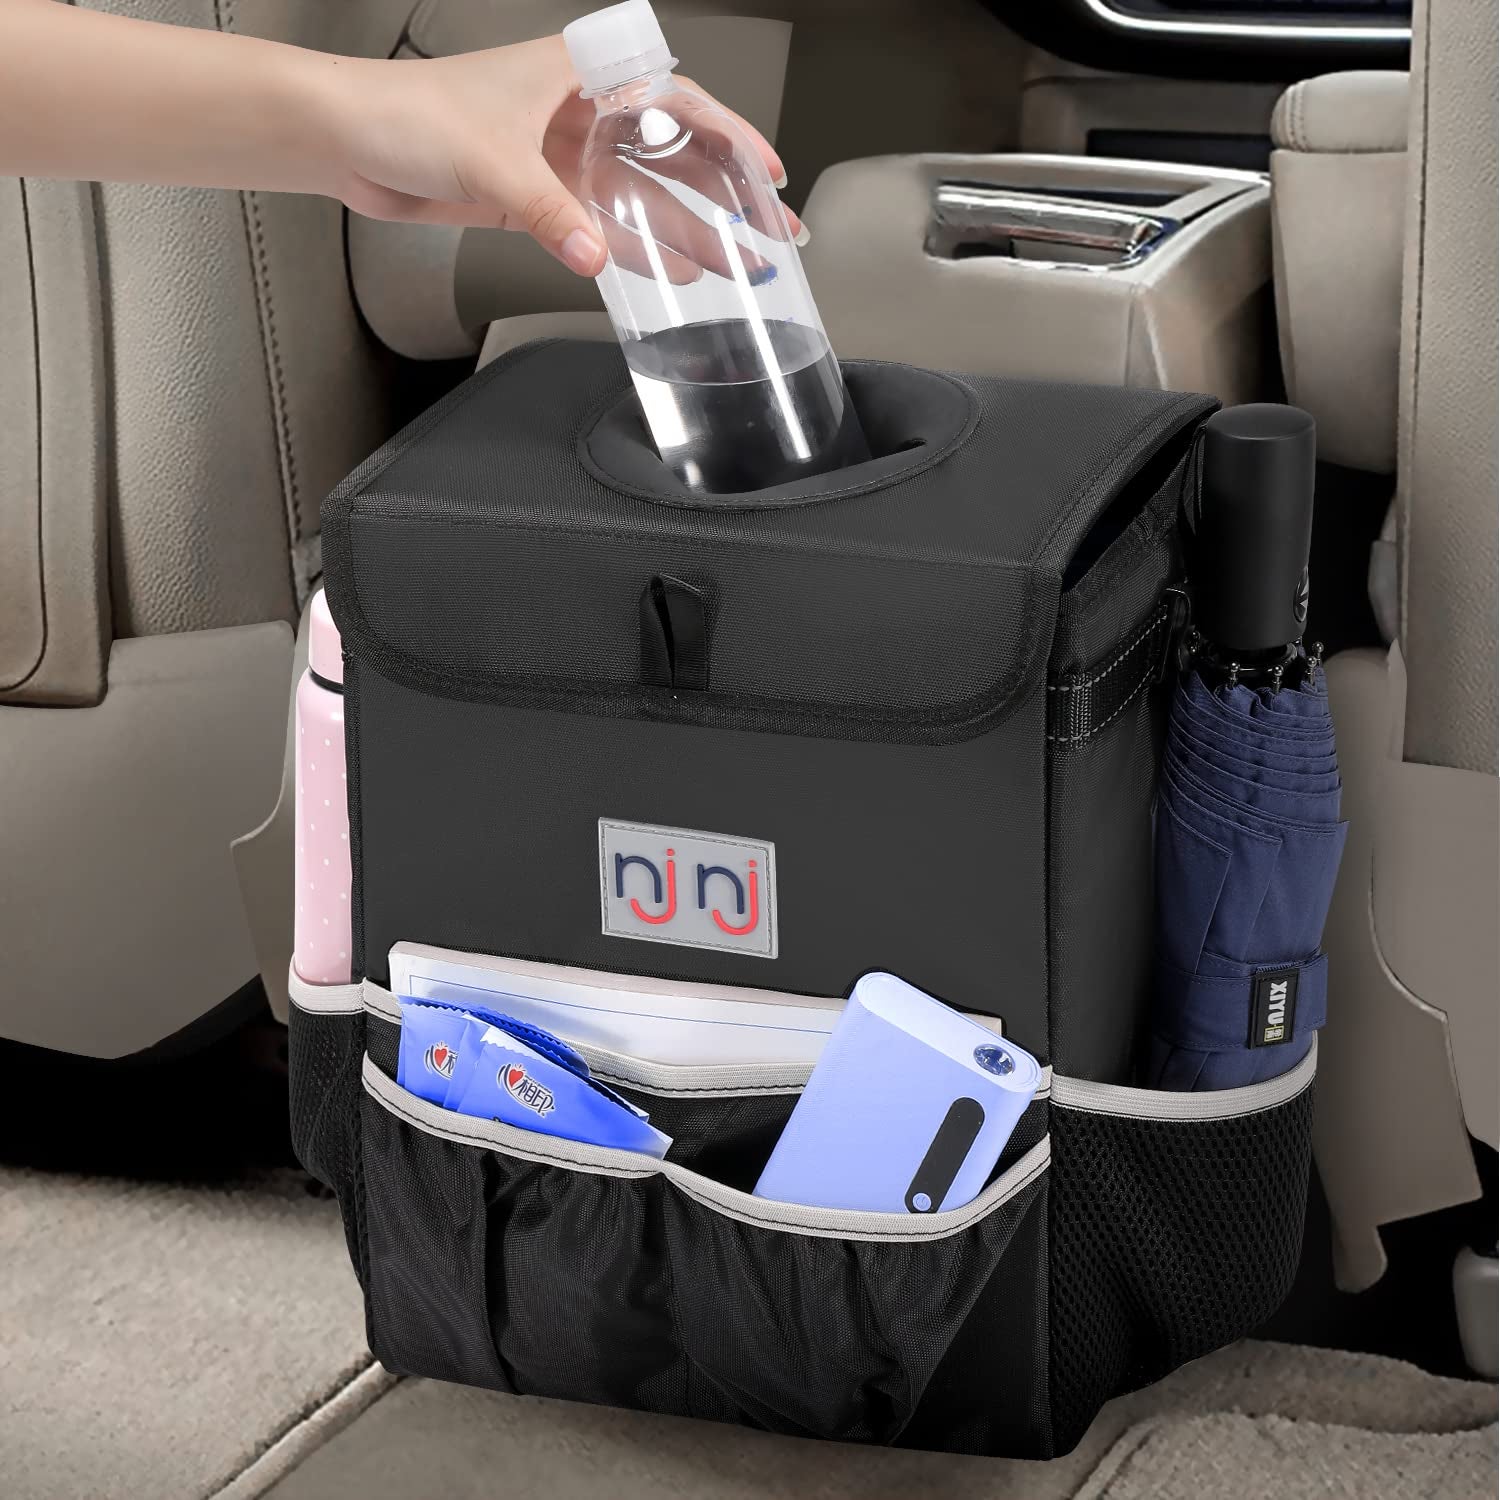 36 Problem-Solving Products For Your Car If It's Messier Than Your